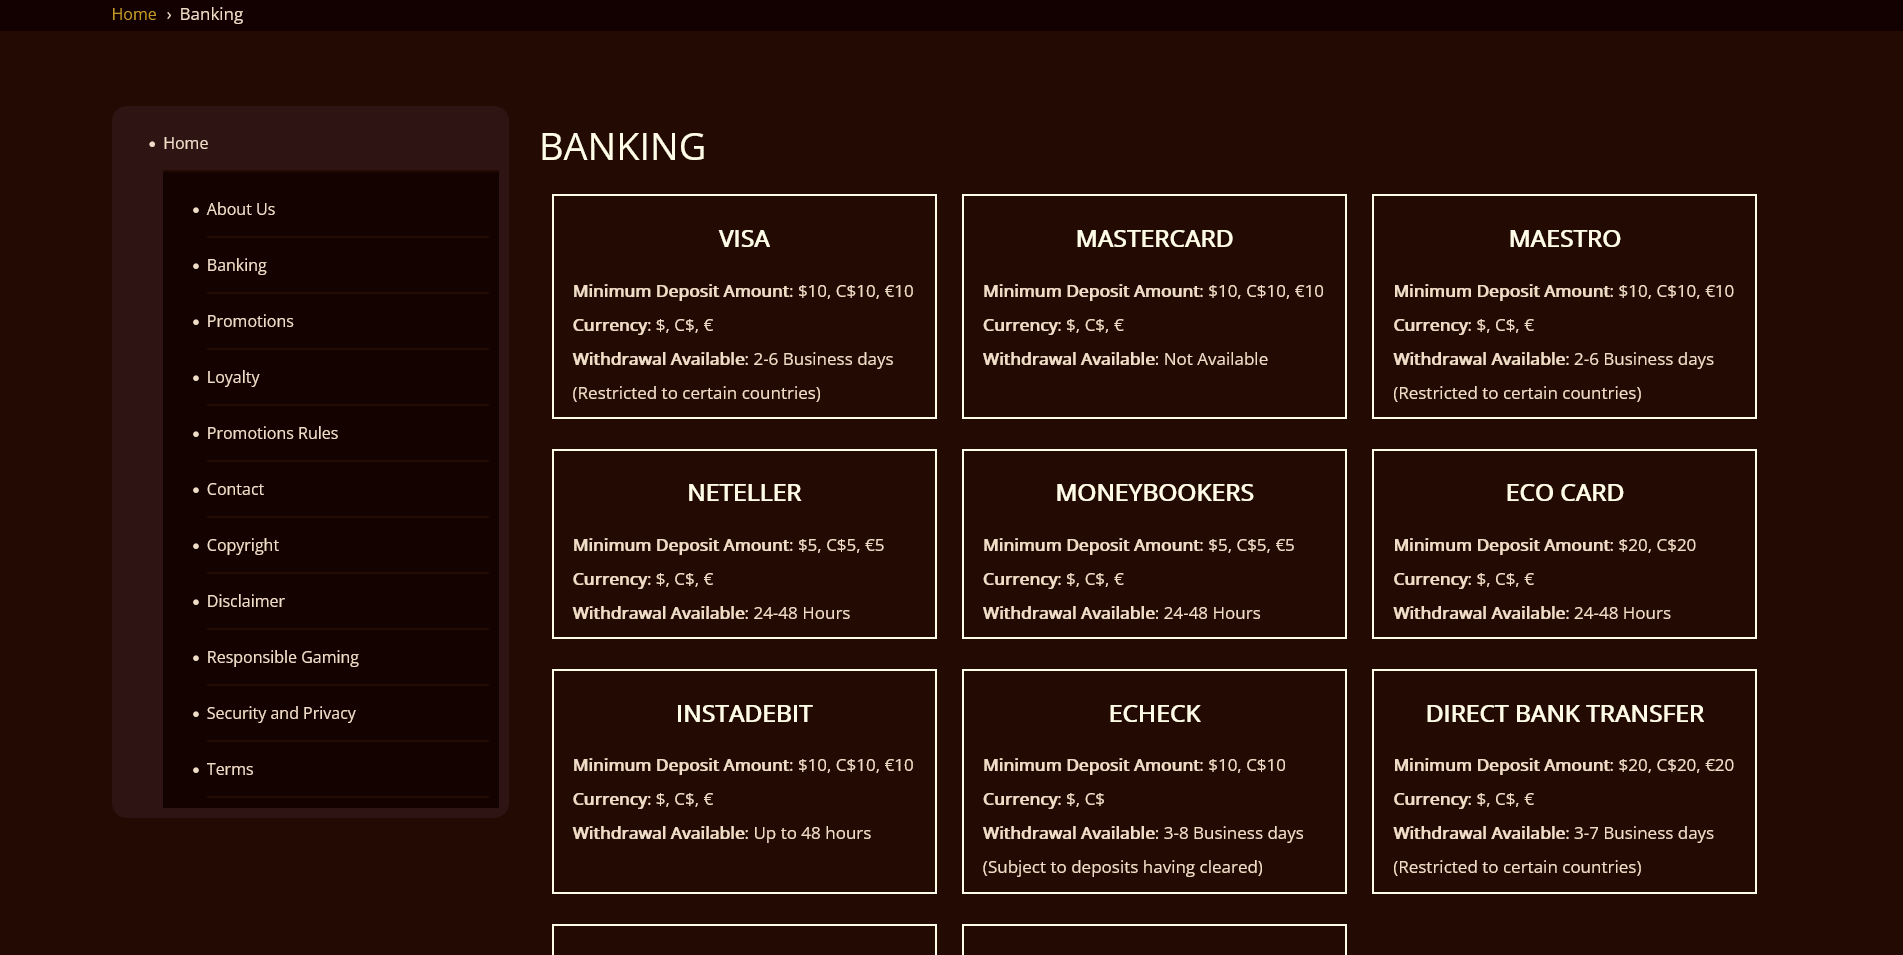 Screenshot of the River Belle Casino banking page